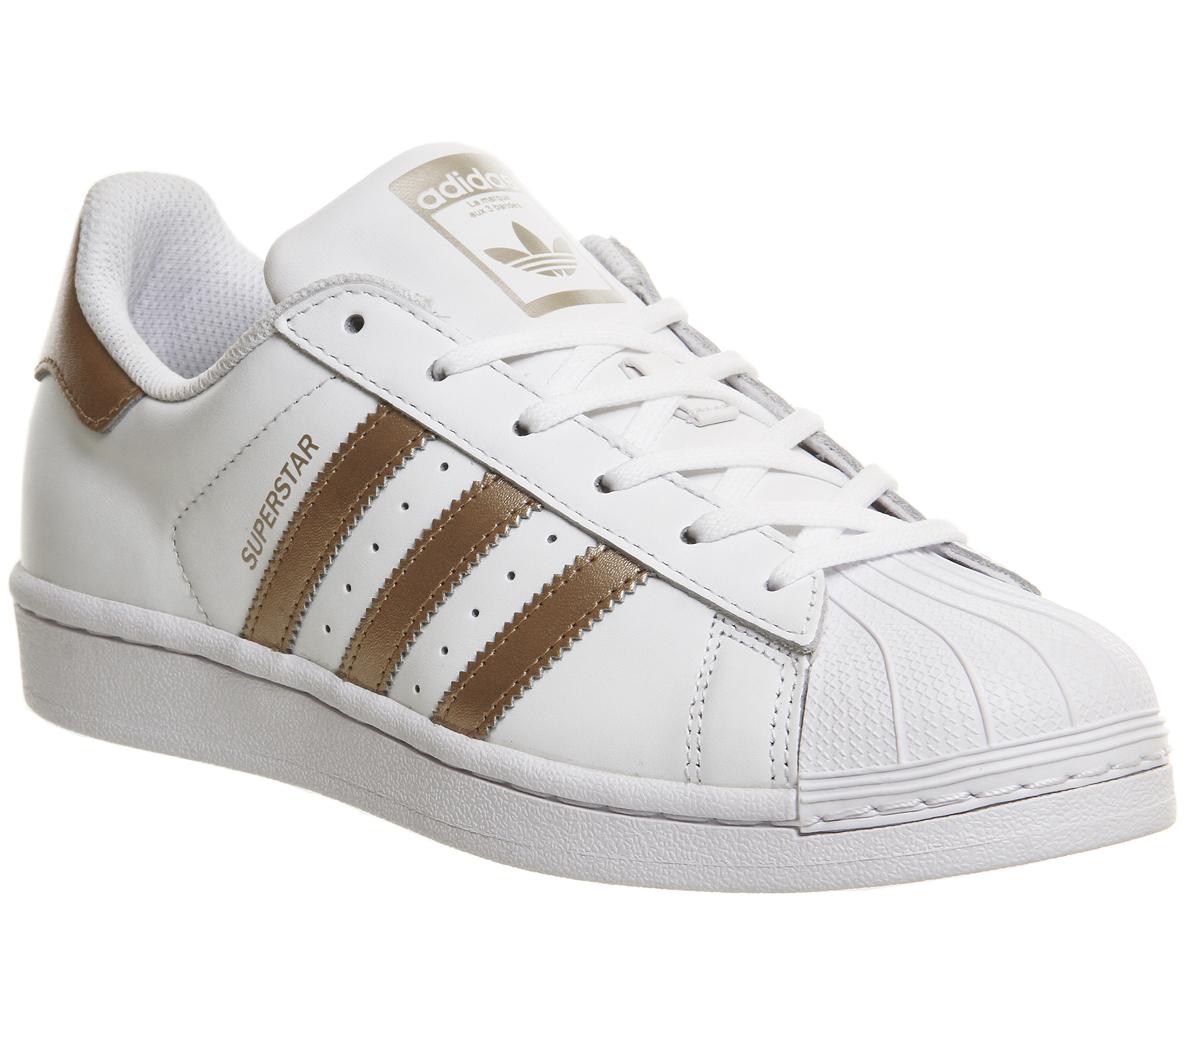 adidas Superstar 1 White Copper - Hers trainers